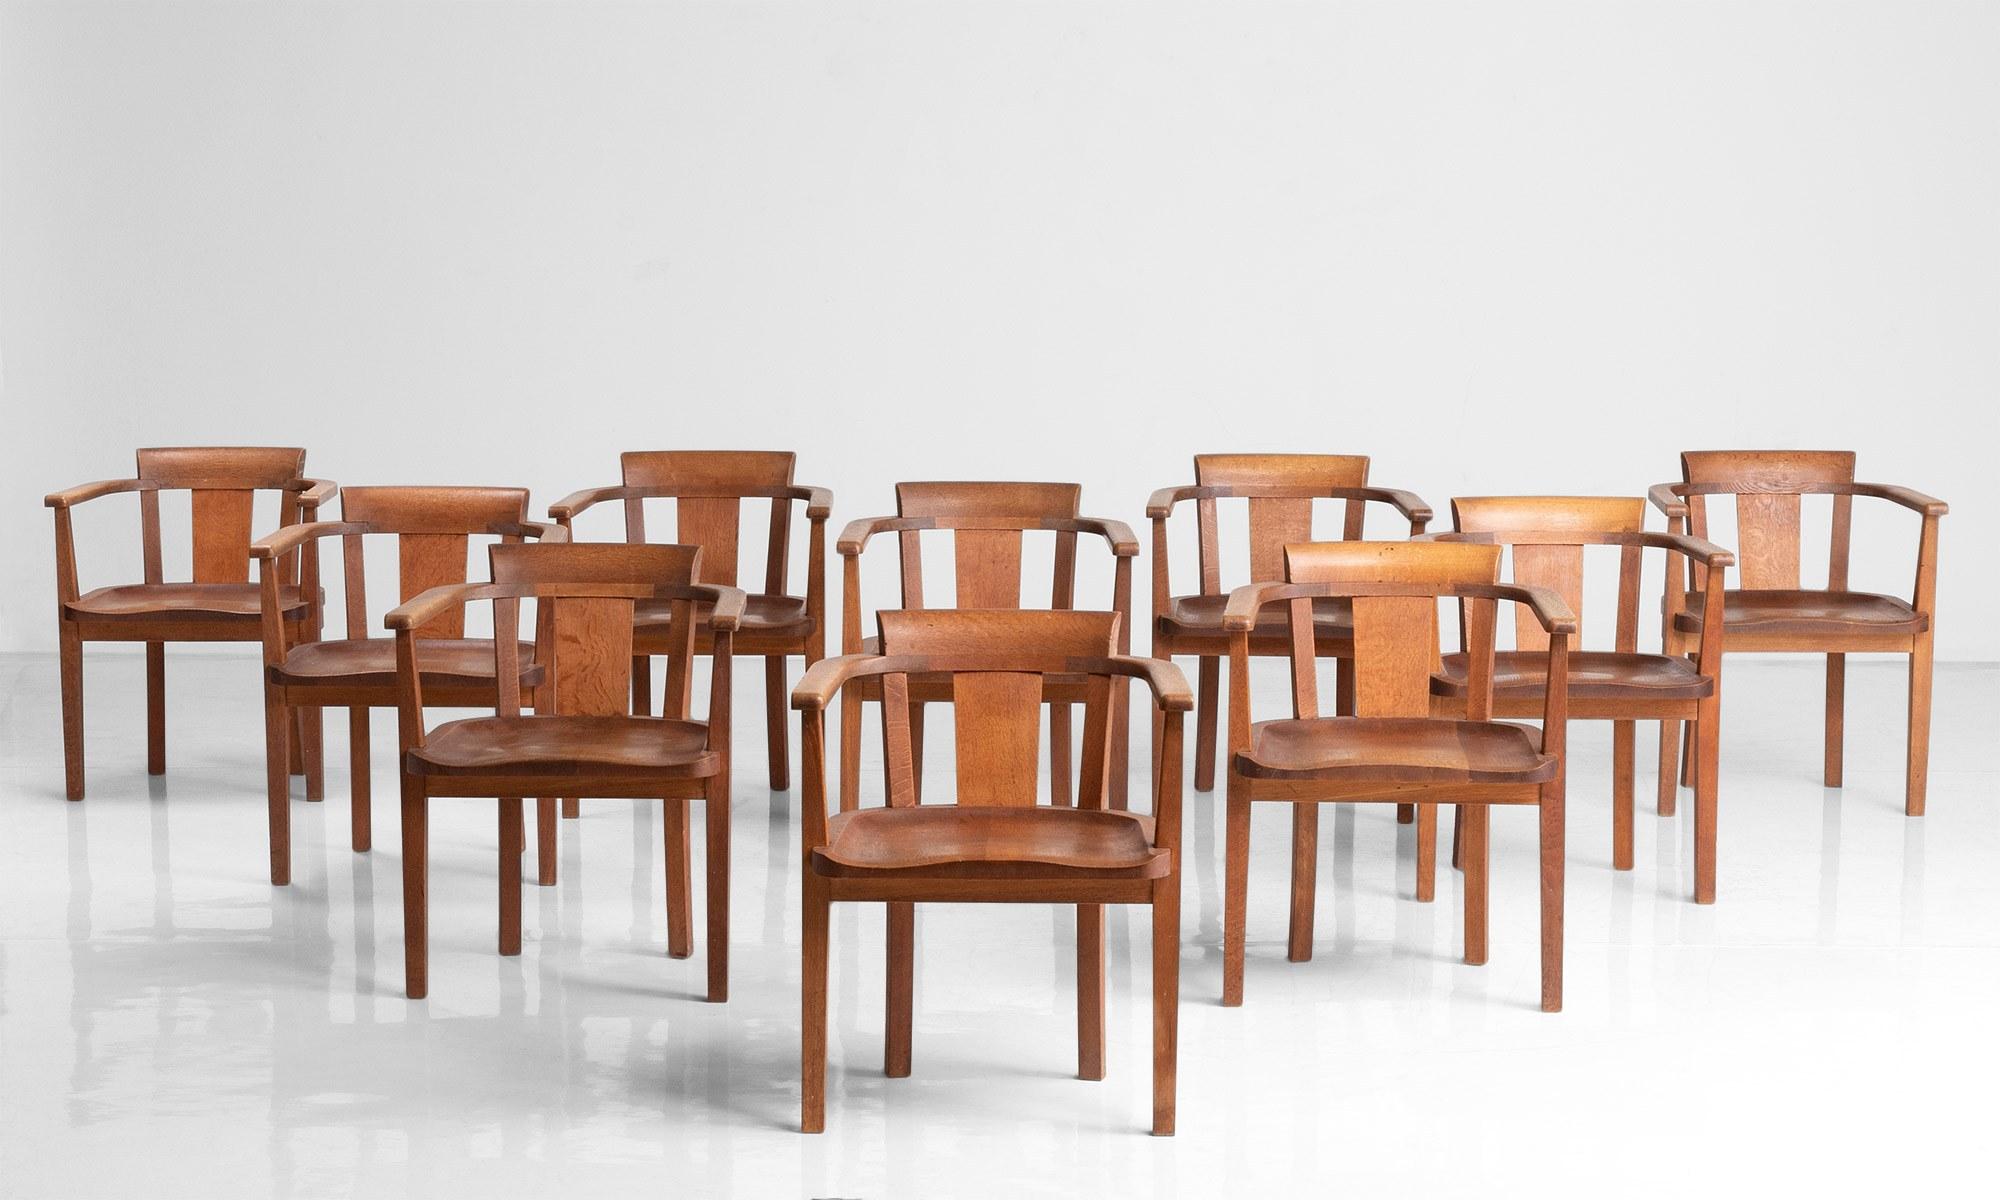 Set of (10) oak dining chairs by Gordon Russell.

England, circa 1930.

Made by Gordon Russell for The Downs Malvern in Herefordshire in the Thirties.

22.5”L x 19”D x 28.25”H x 16.5”seat.